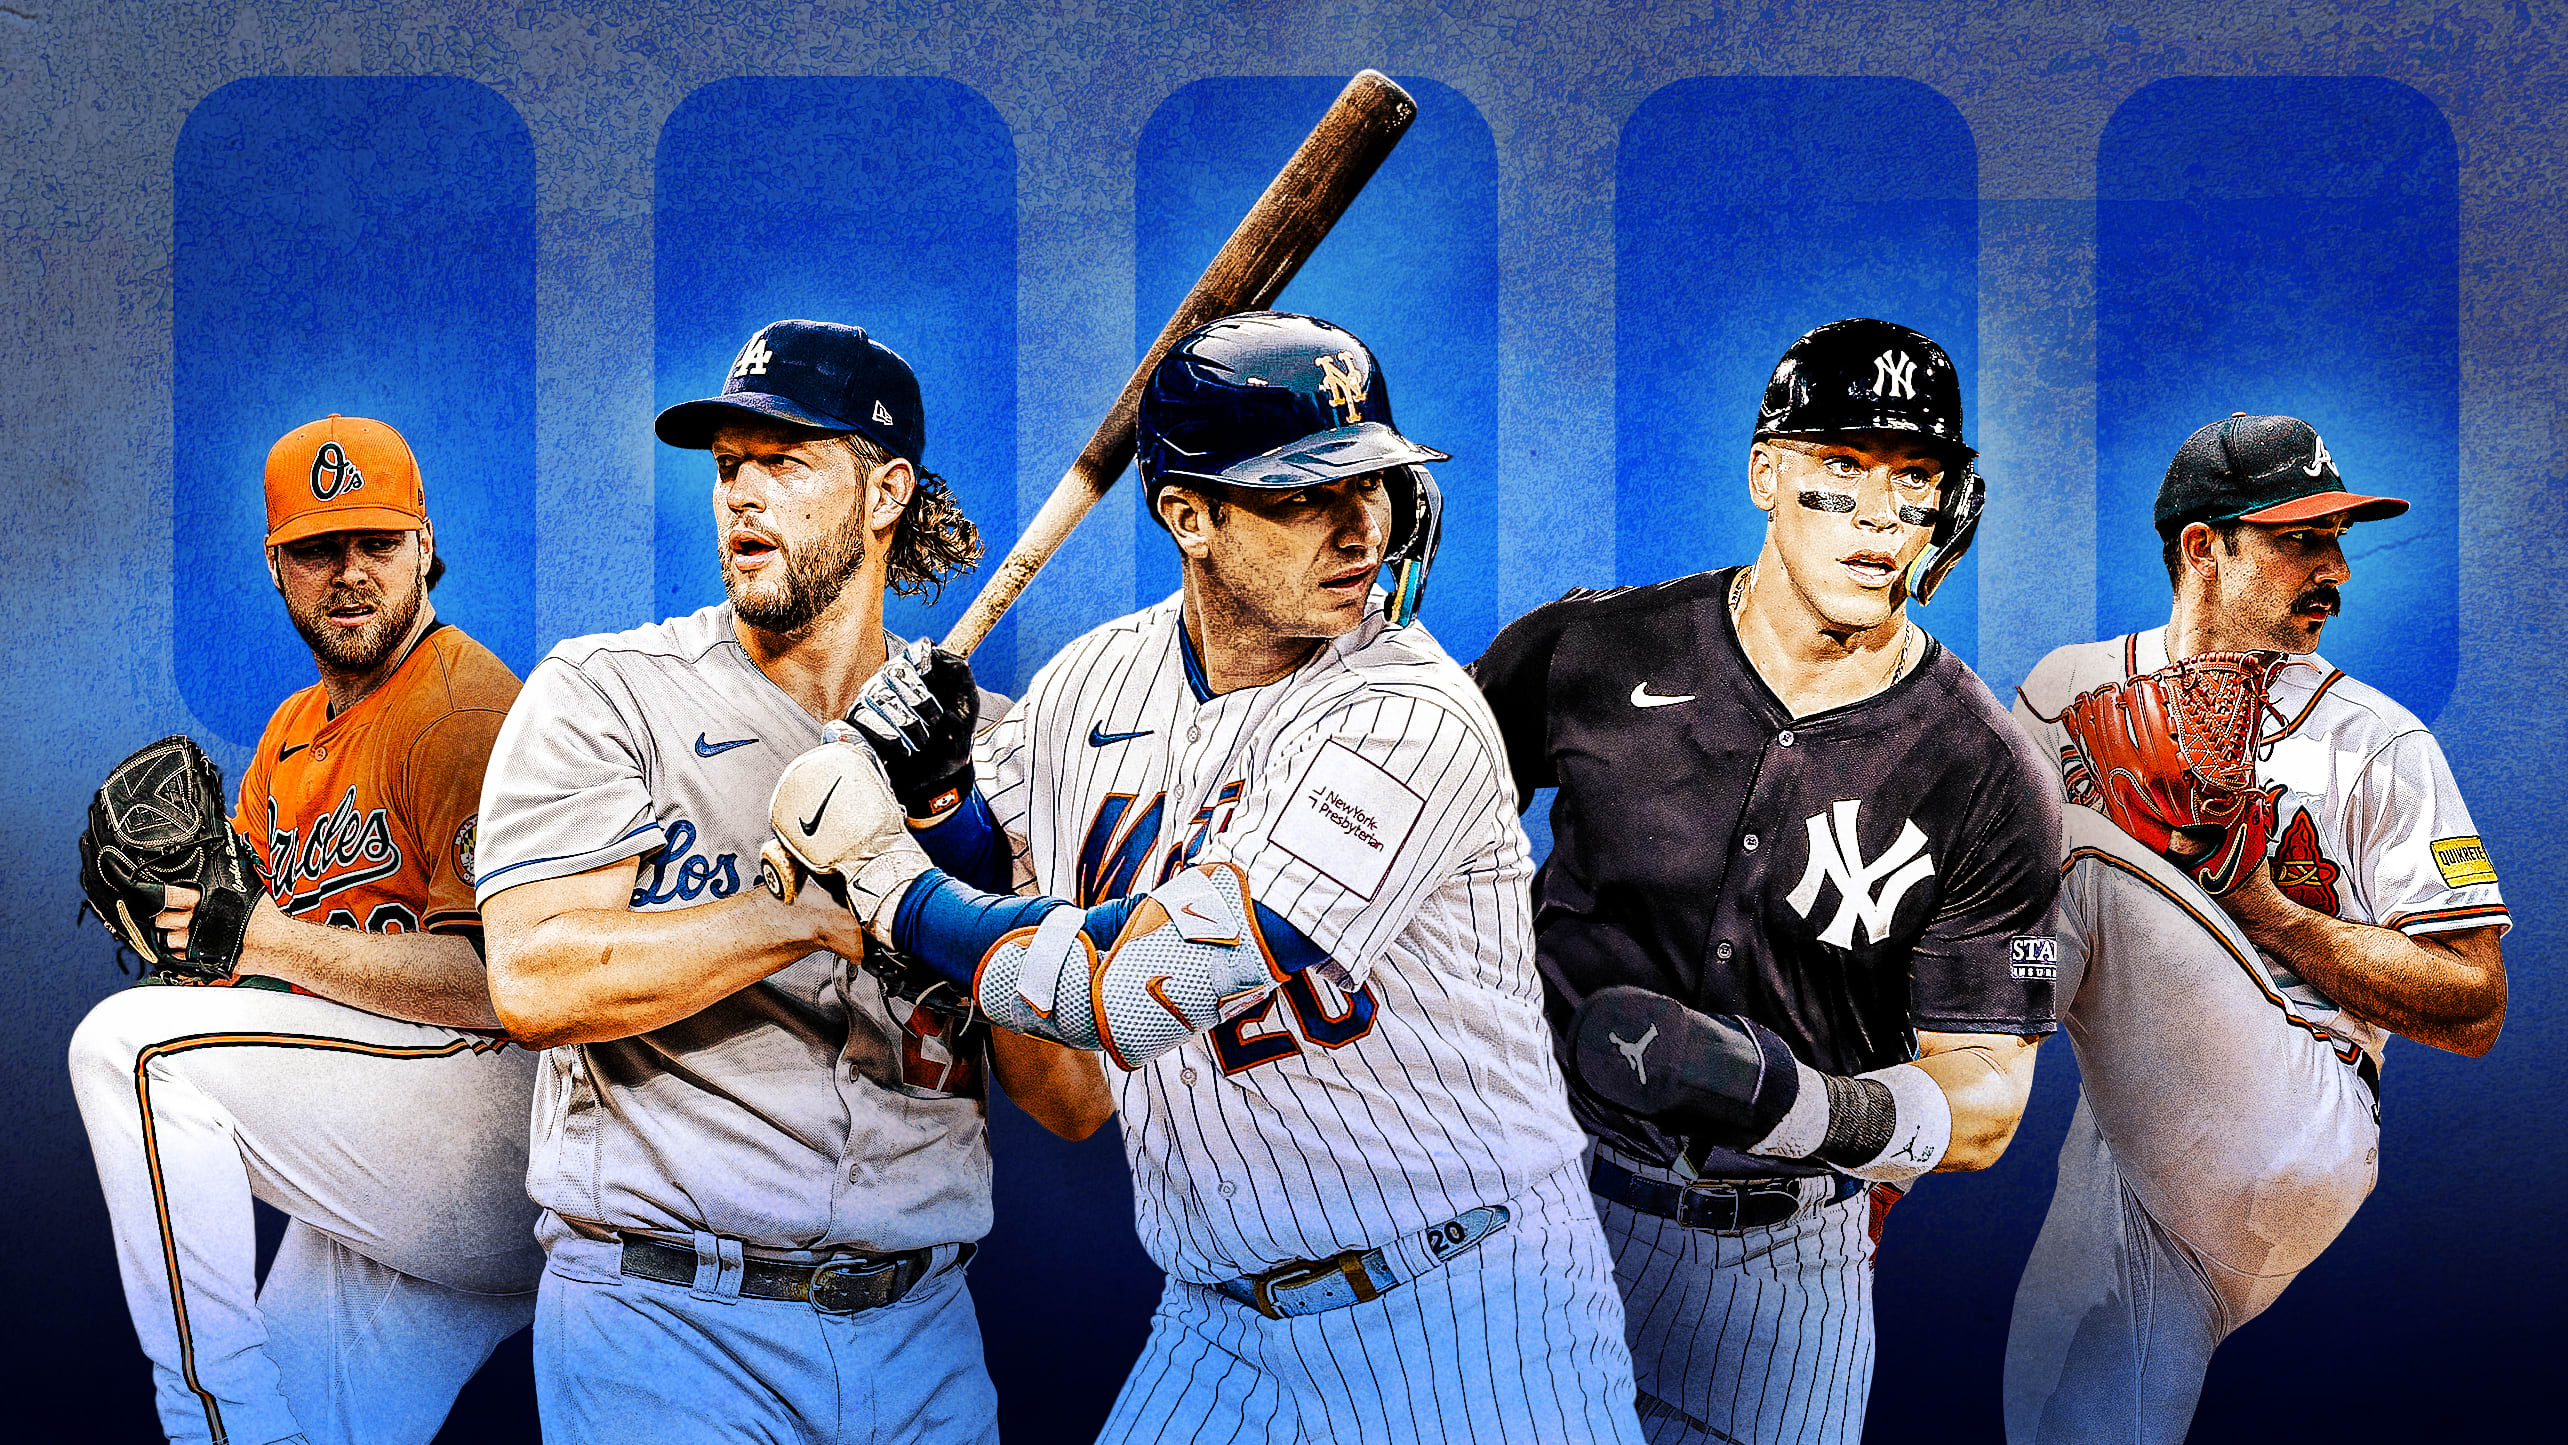 Stars like Corbin Burnes, Clayton Kershaw, Pete Alonso, Aaron Judge and Spencer Strider have milestones in their sights this season